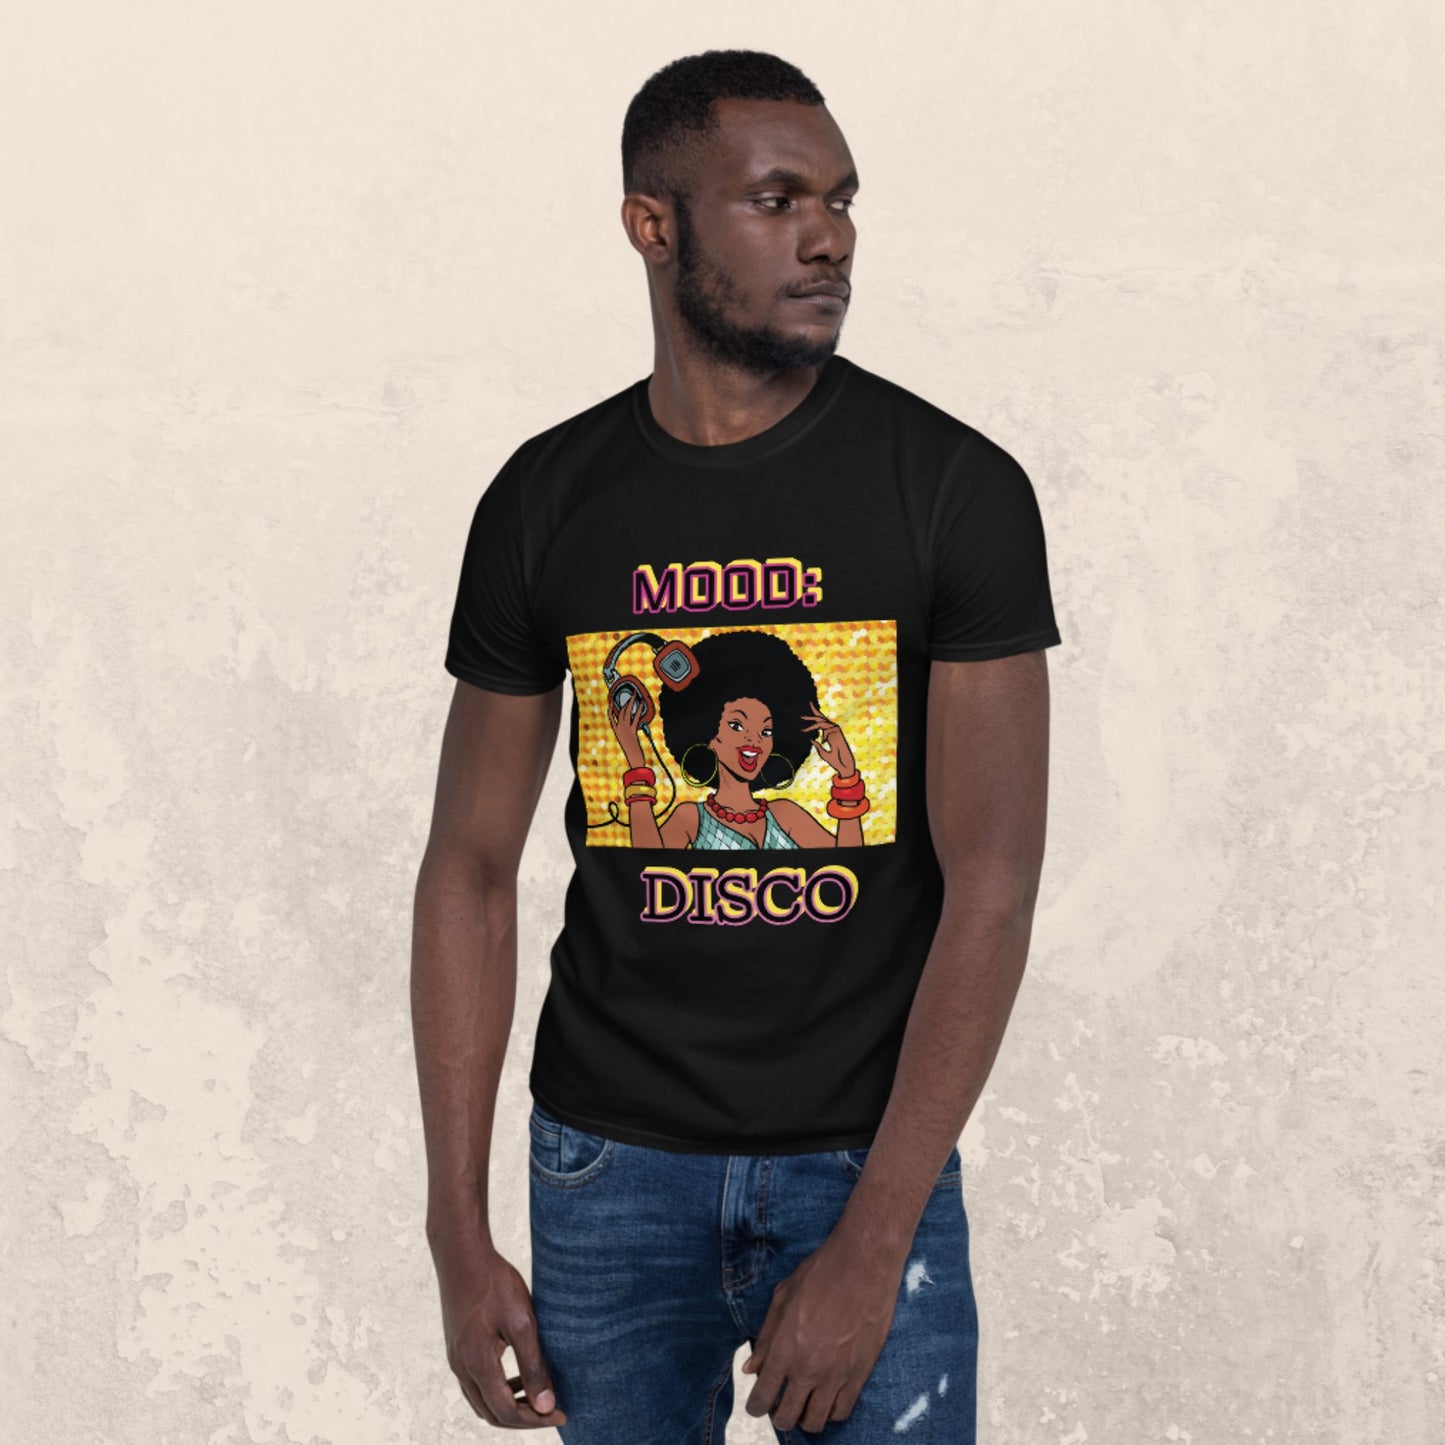 Mood: Disco Short Sleeve Unisex T-Shirt - BeExtra! Apparel & More